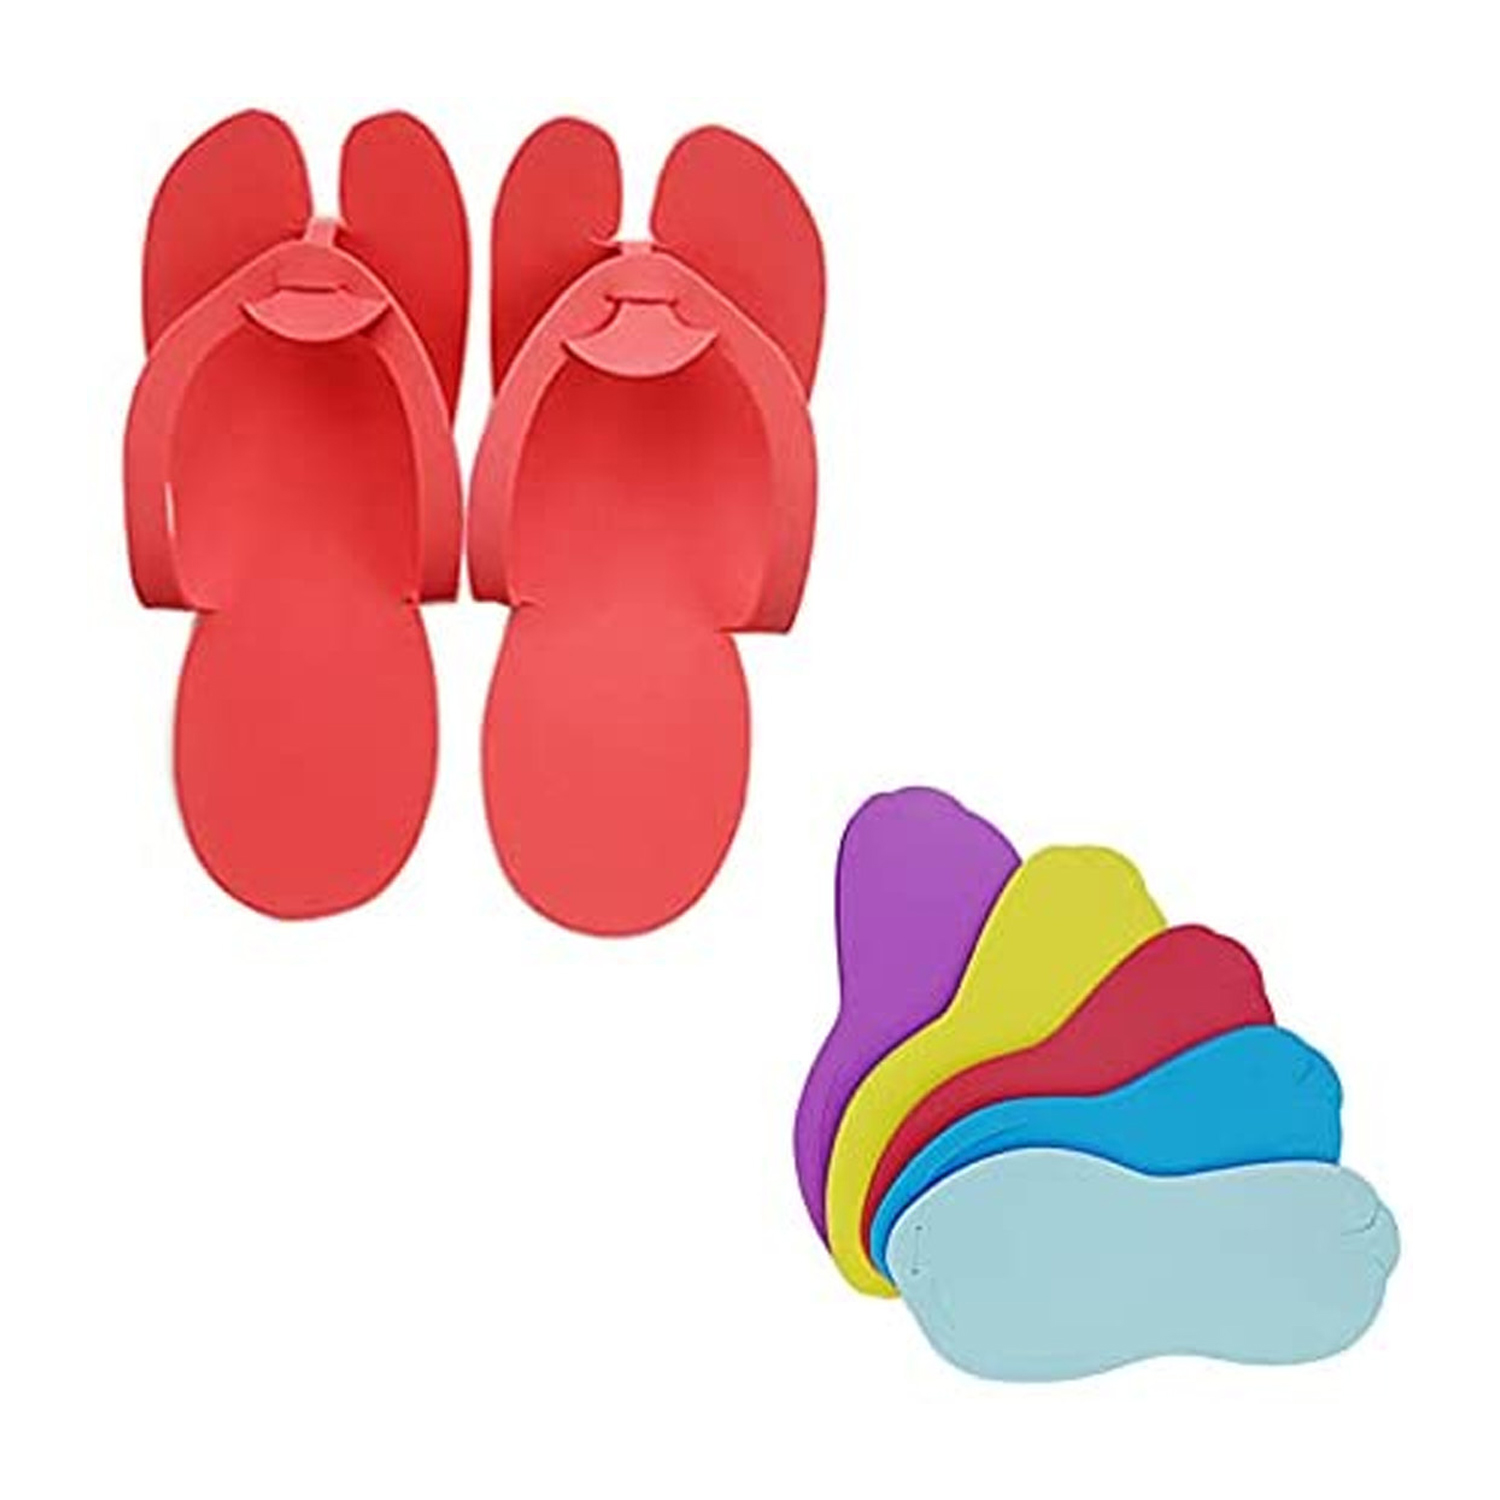 22-disposable-slippers-assorted-colors-3-blademaster.jpg